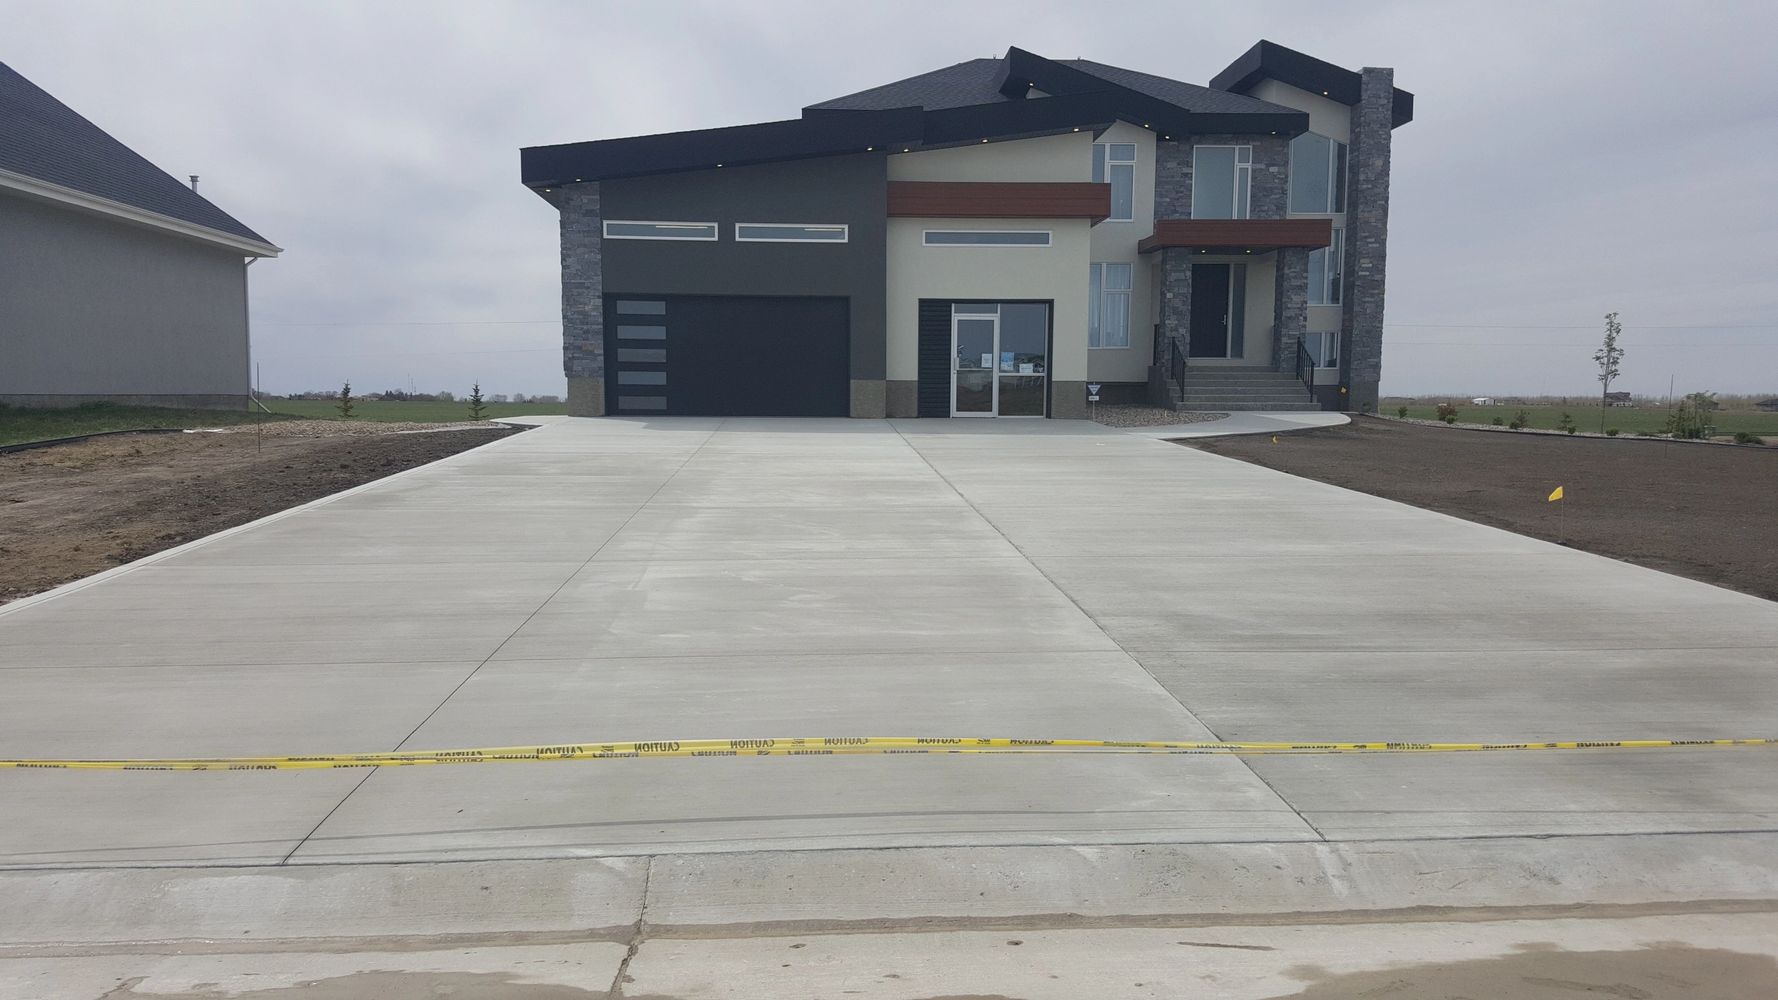 2019 Stars Lottery Showhome. This driveway & sidewalk is over 3000 sqft. We placed and finished it.